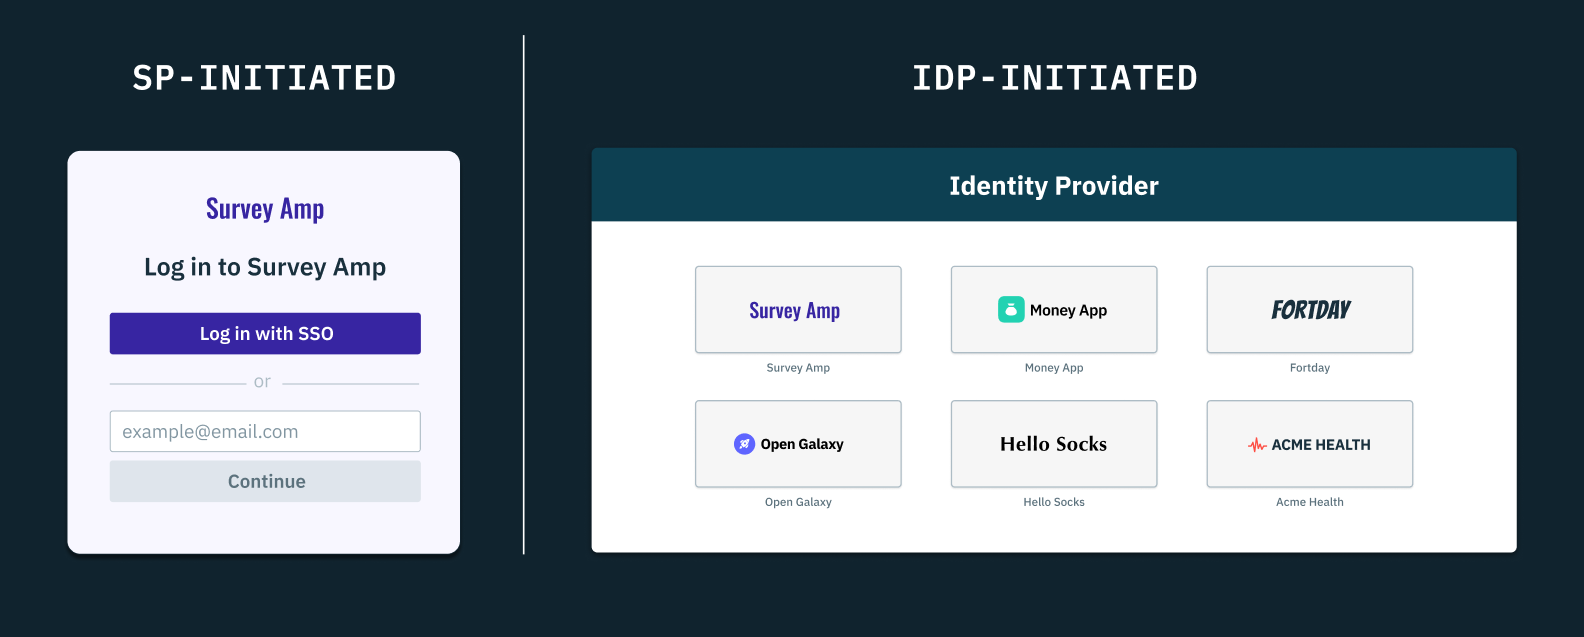 A comparison of an SP-initiated login screen (that starts within the client app) and an IDP-initiated login screen (which starts within the Identity Provider's dashboard)